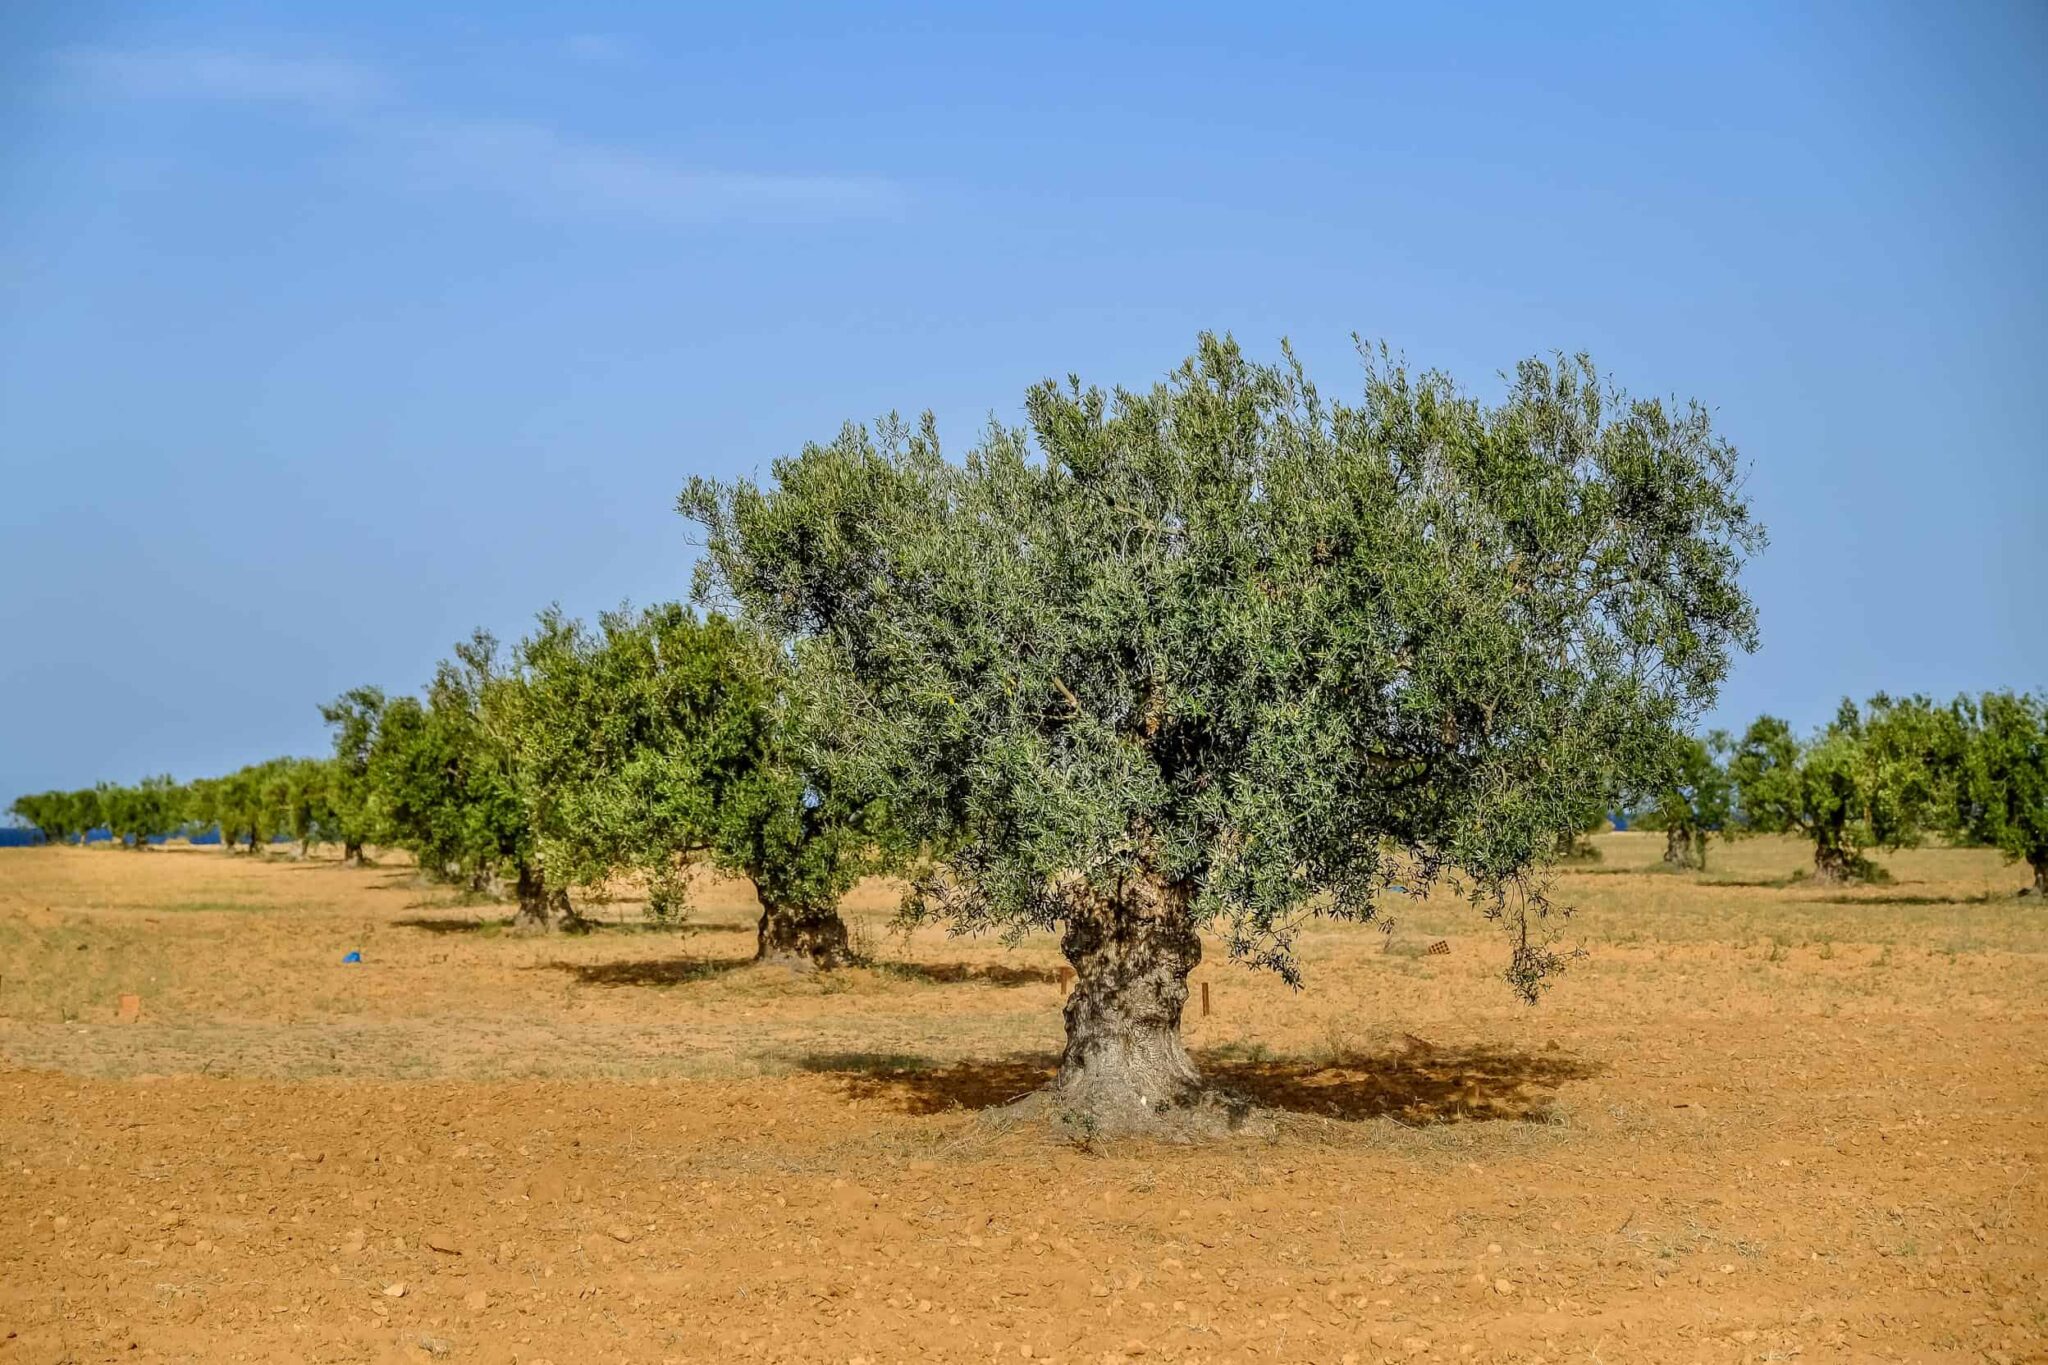 Olive trees in a field with a blue sky.